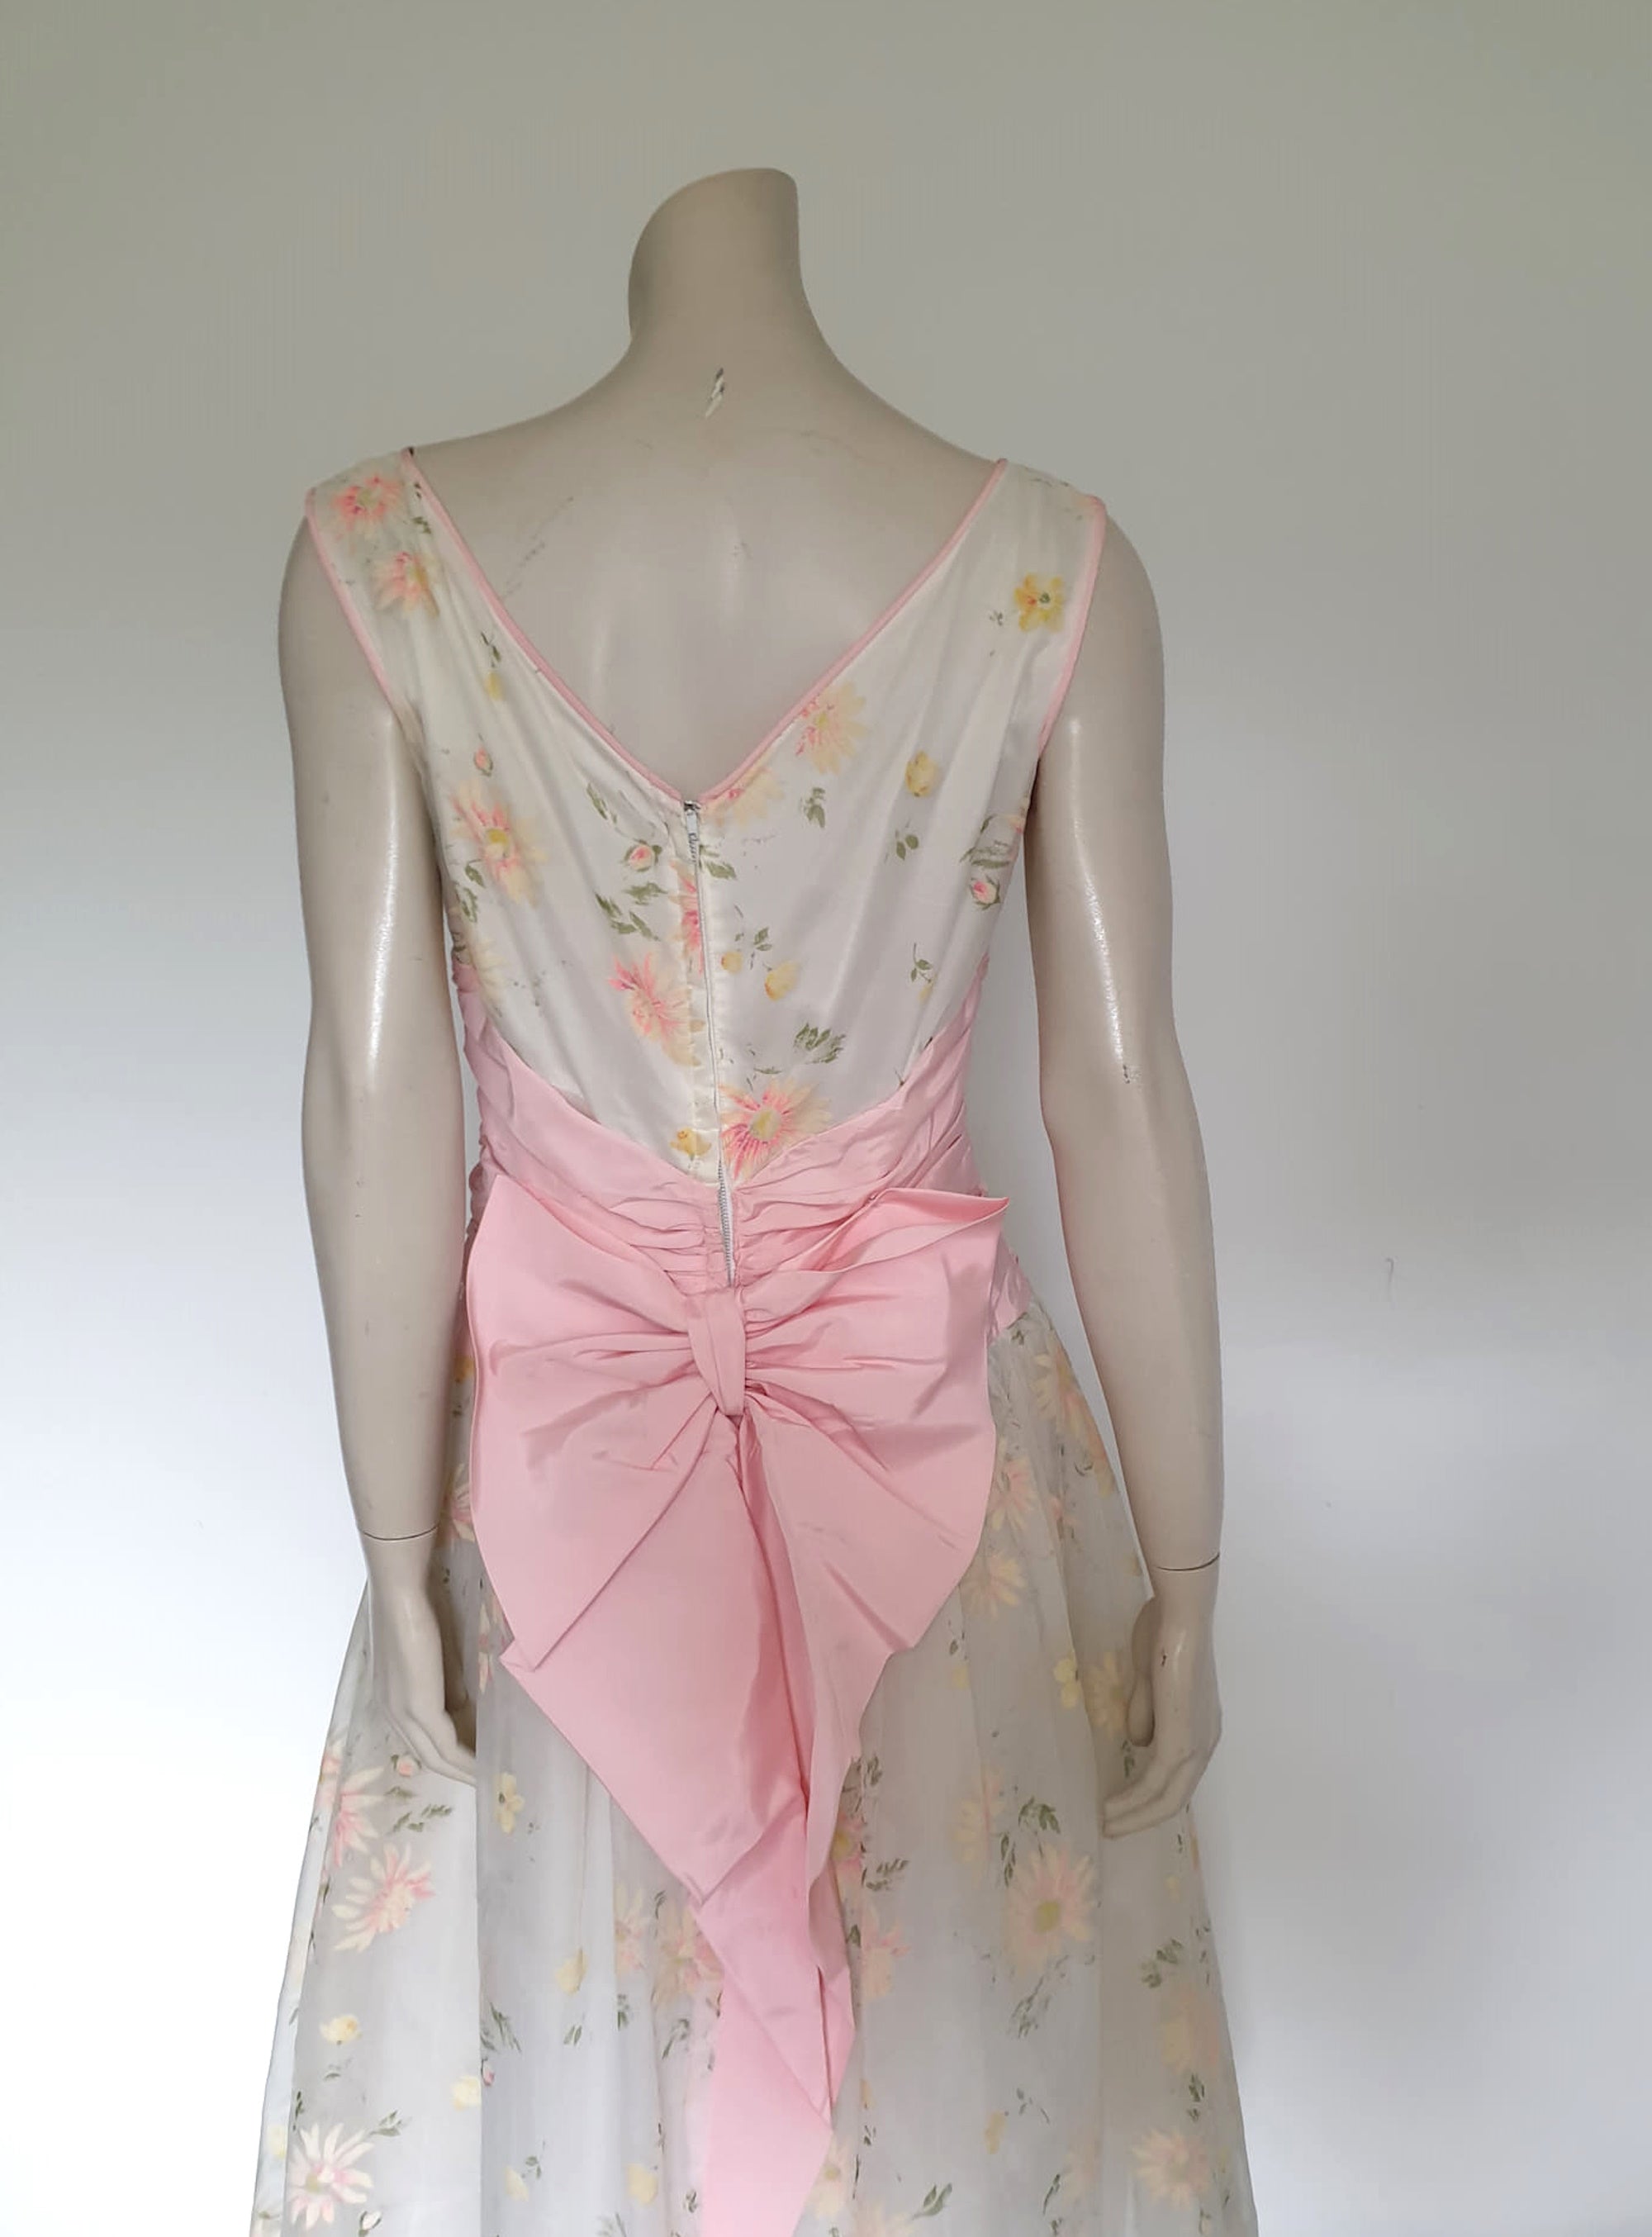 1950s vintage flocked prom dress or party dress with rear bow medium